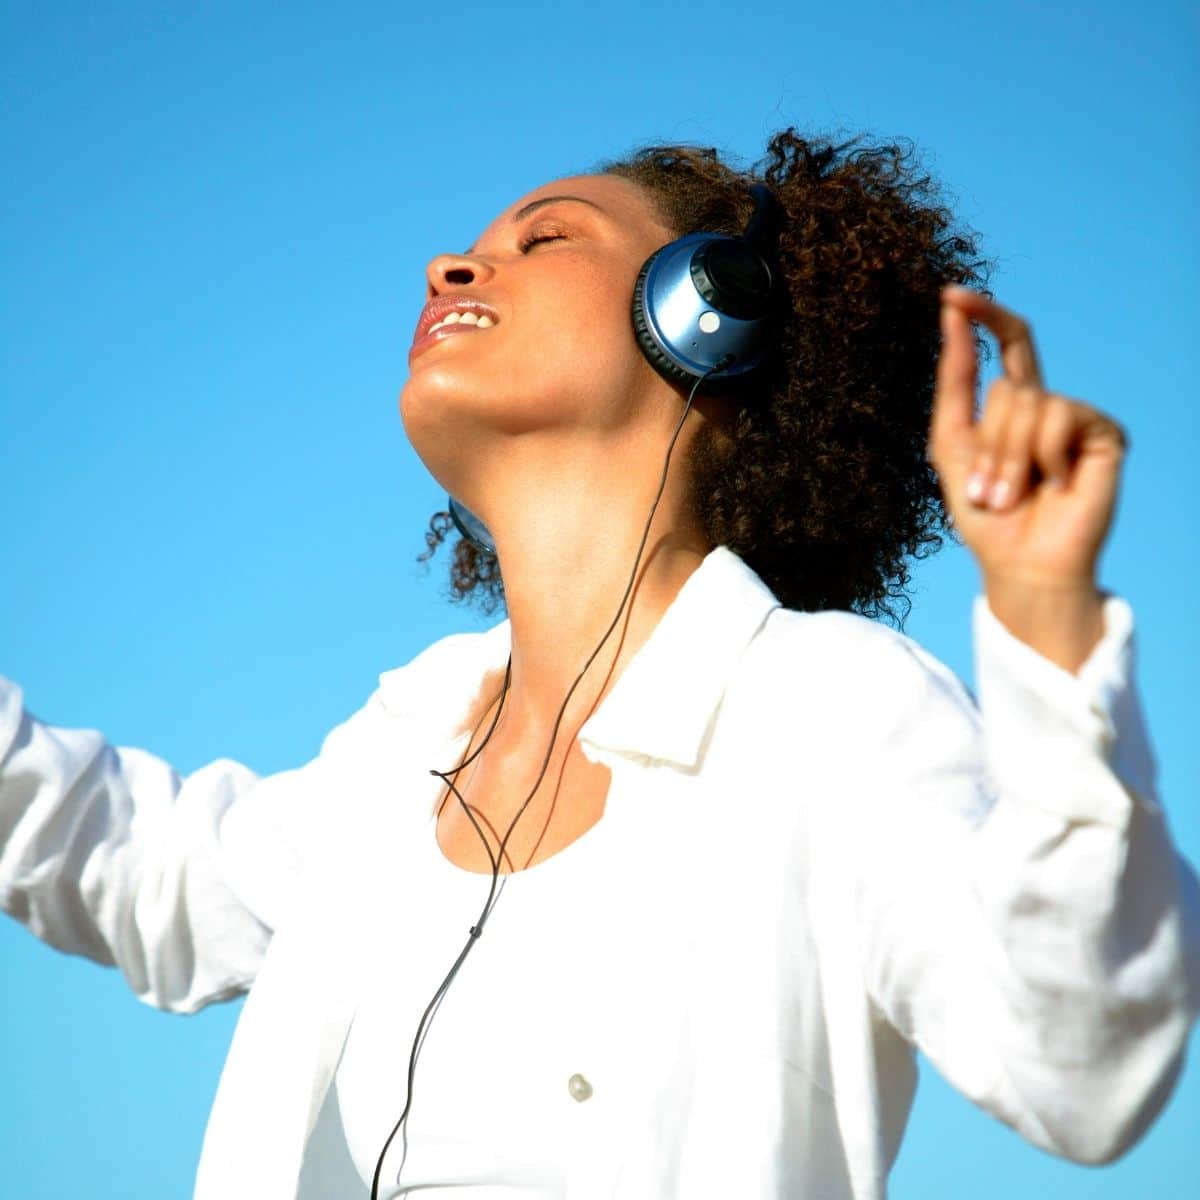 A black woman wearing a white shirt dancing with headphones in front of a blue background.